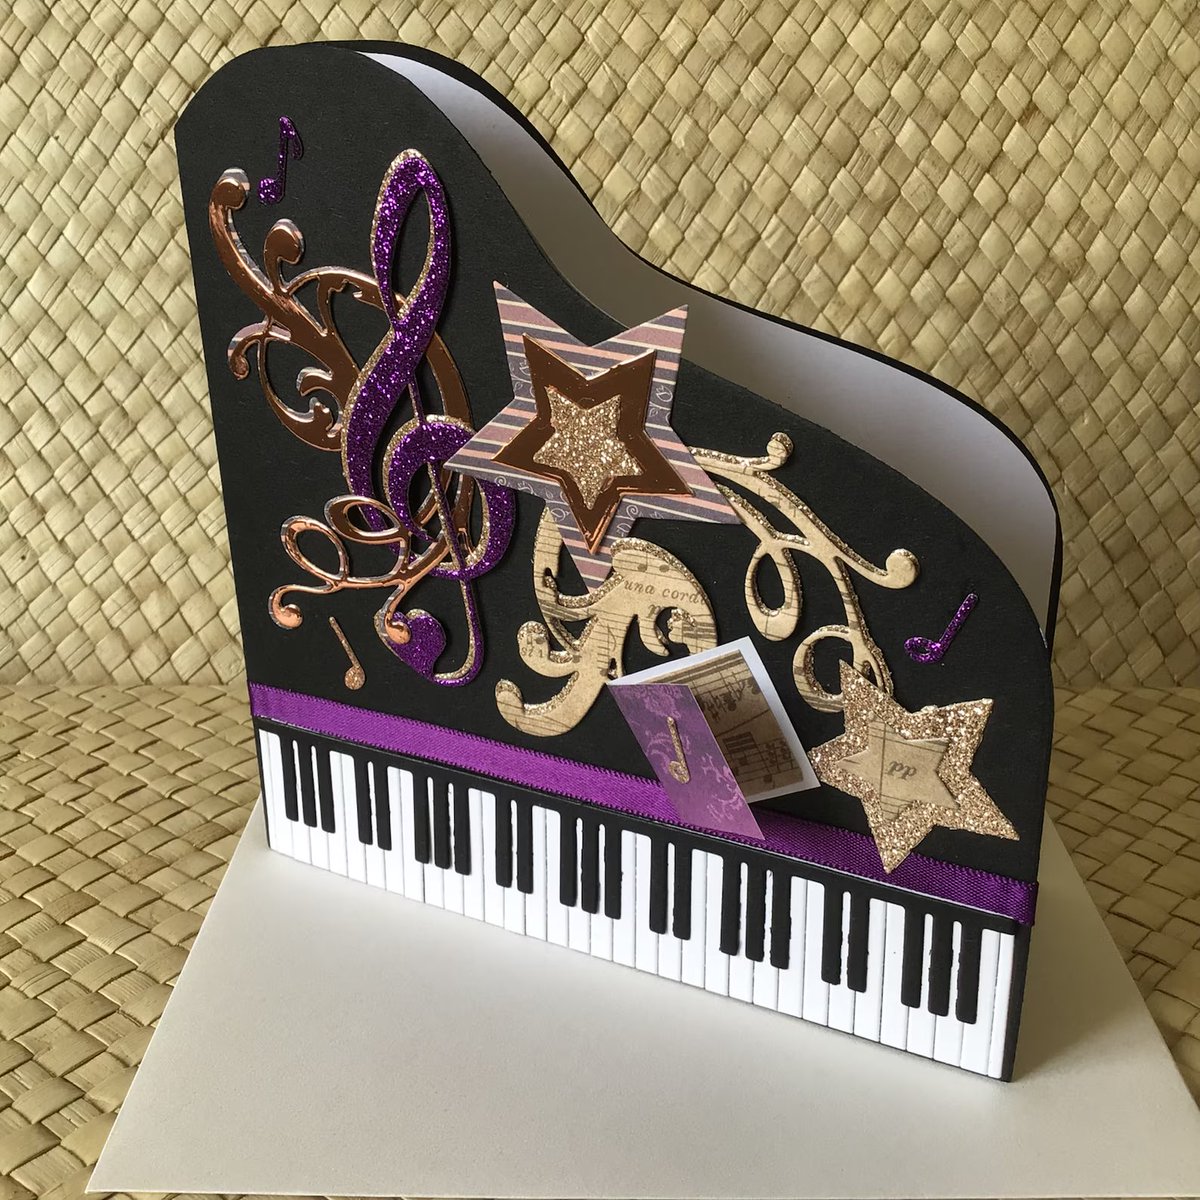 Baby Grand Piano Card, Musician Birthday, Keyboard Student or Teacher Gift etsy.me/3xDIg73 

#YourBizHour #womaninbizhour #pianomagic #bespokecards